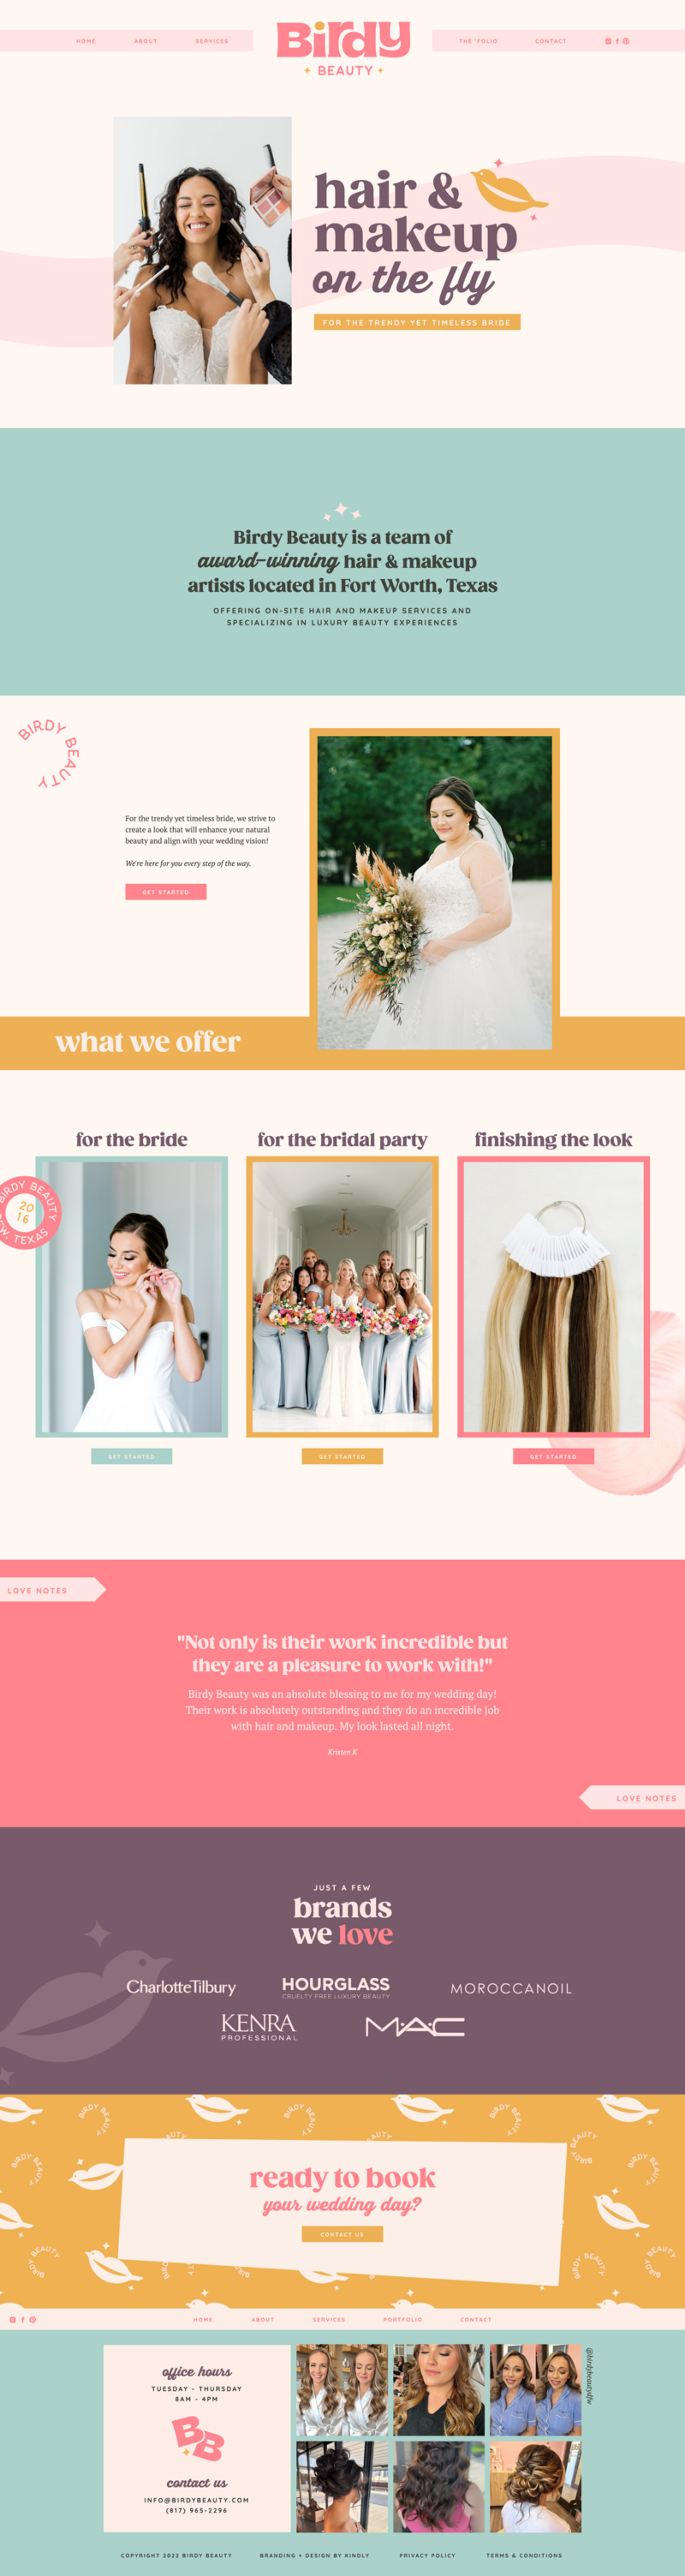 Showit website mockup for hair and makeup company Birdy Beauty